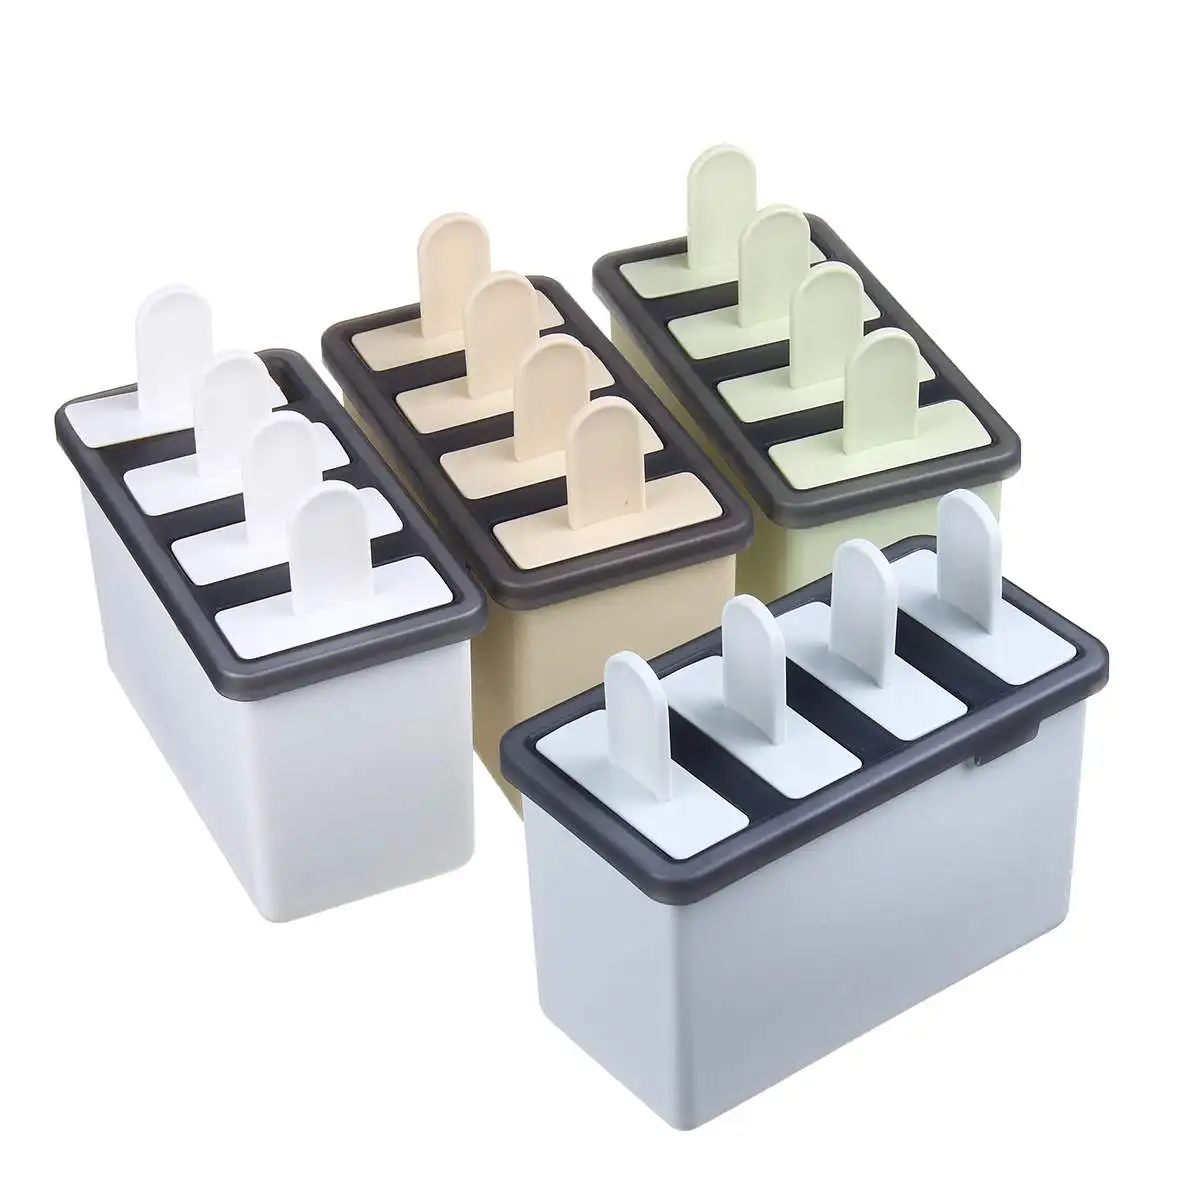 

DIY Ice Cube Mold Box Ice Cream Juice Yogurt Lolly Mould Tray Tools Square 4 Cell Silicone Popsicle Maker Molds